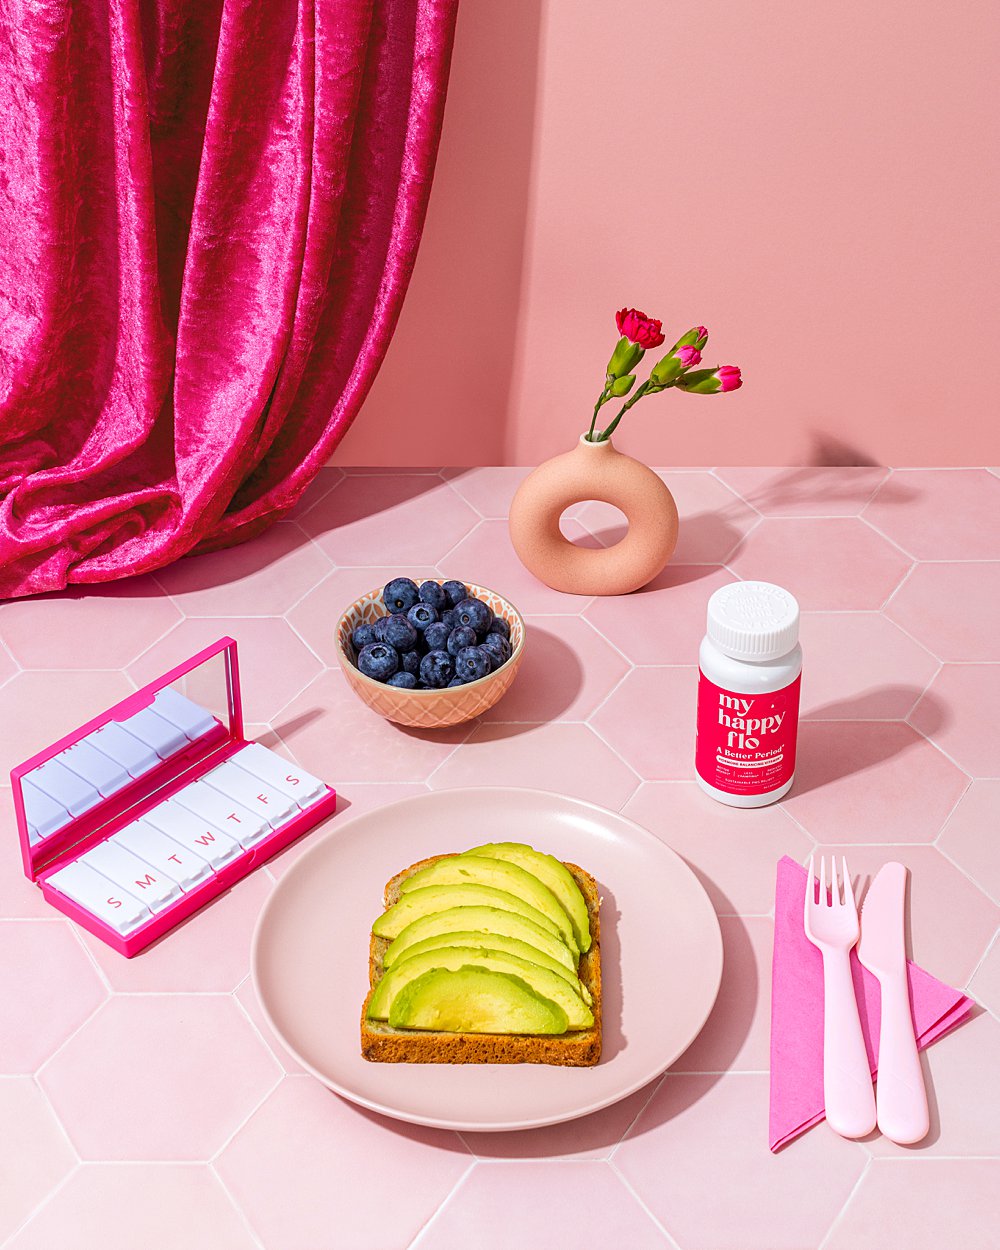 Colourful content creation for My Happy Flo female health supplements. Styled product still life photography by HIYA MARIANNE content studio.